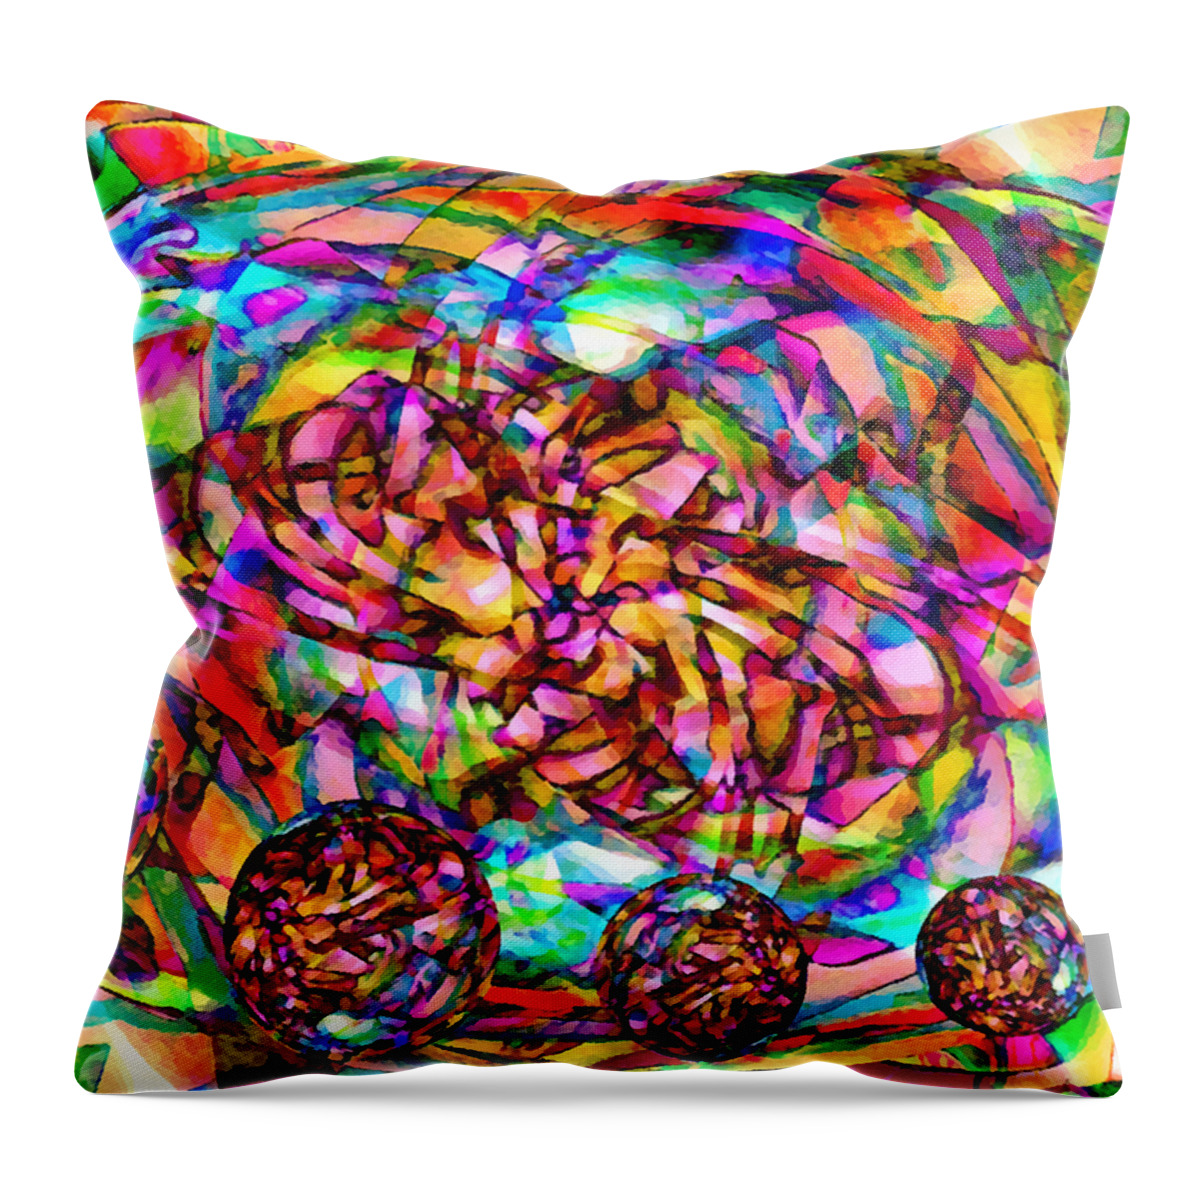 World Throw Pillow featuring the mixed media Welcome To My World by Angelina Tamez